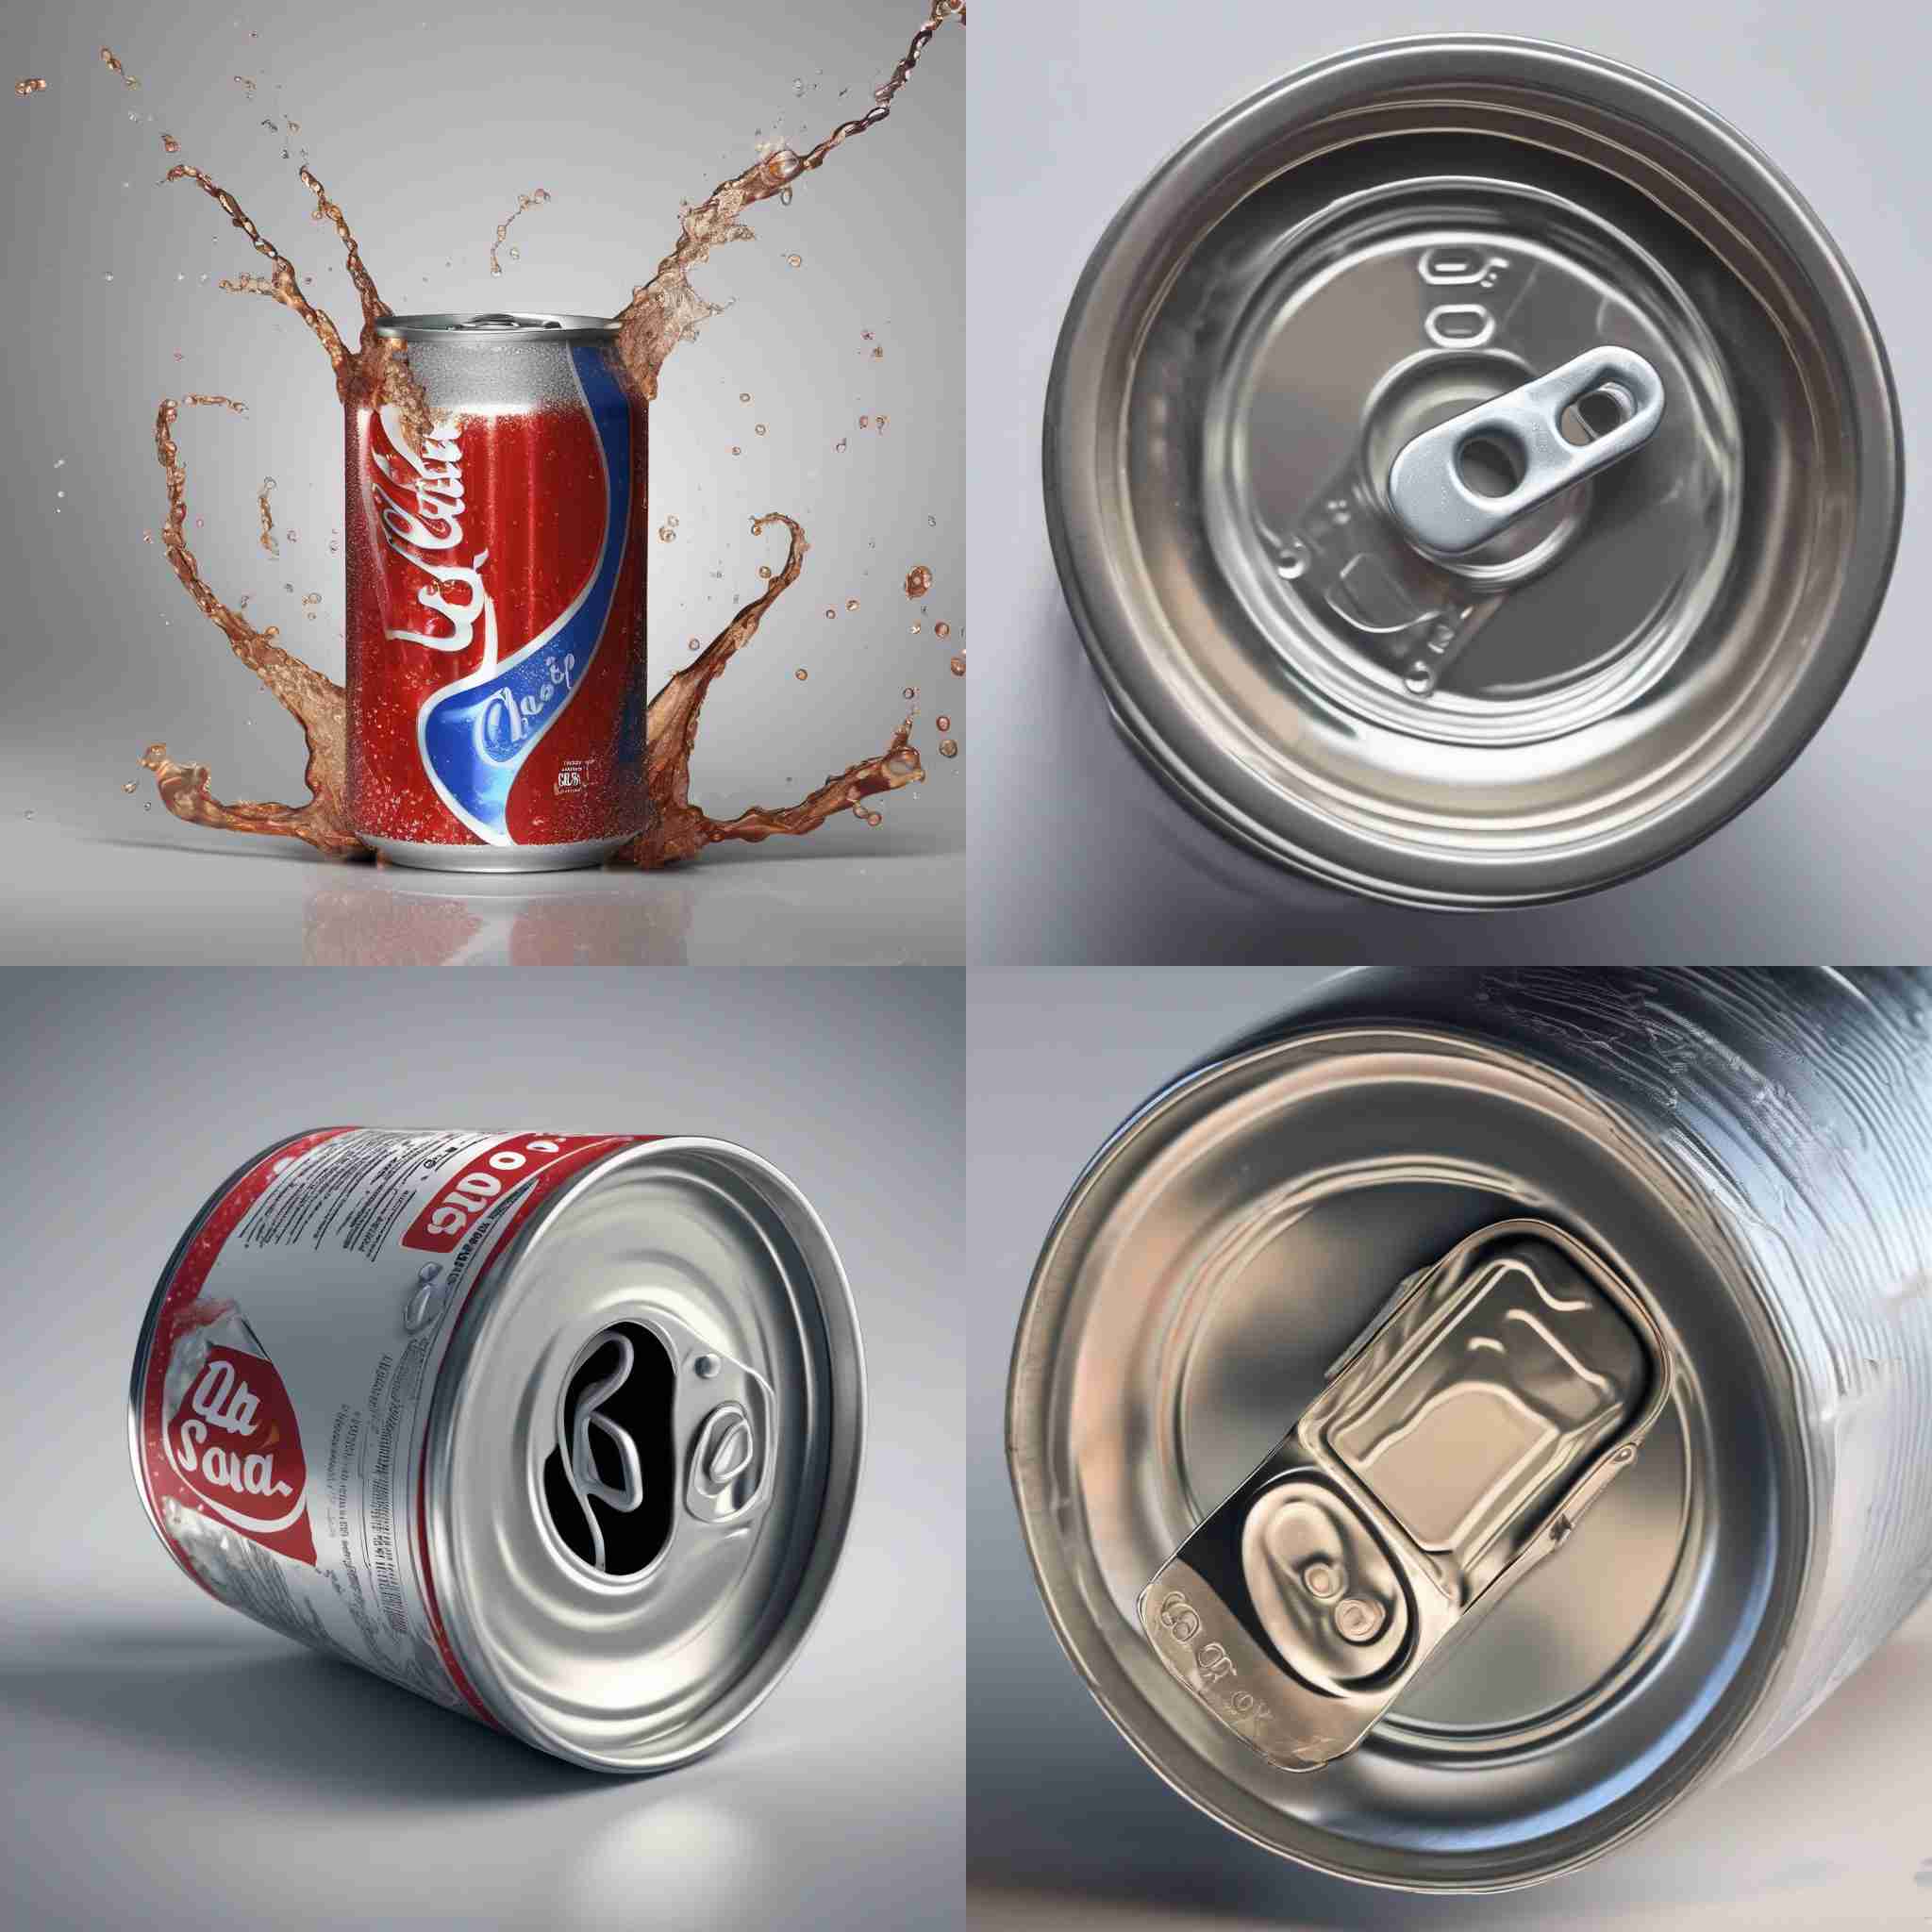 A soda can opened slowly